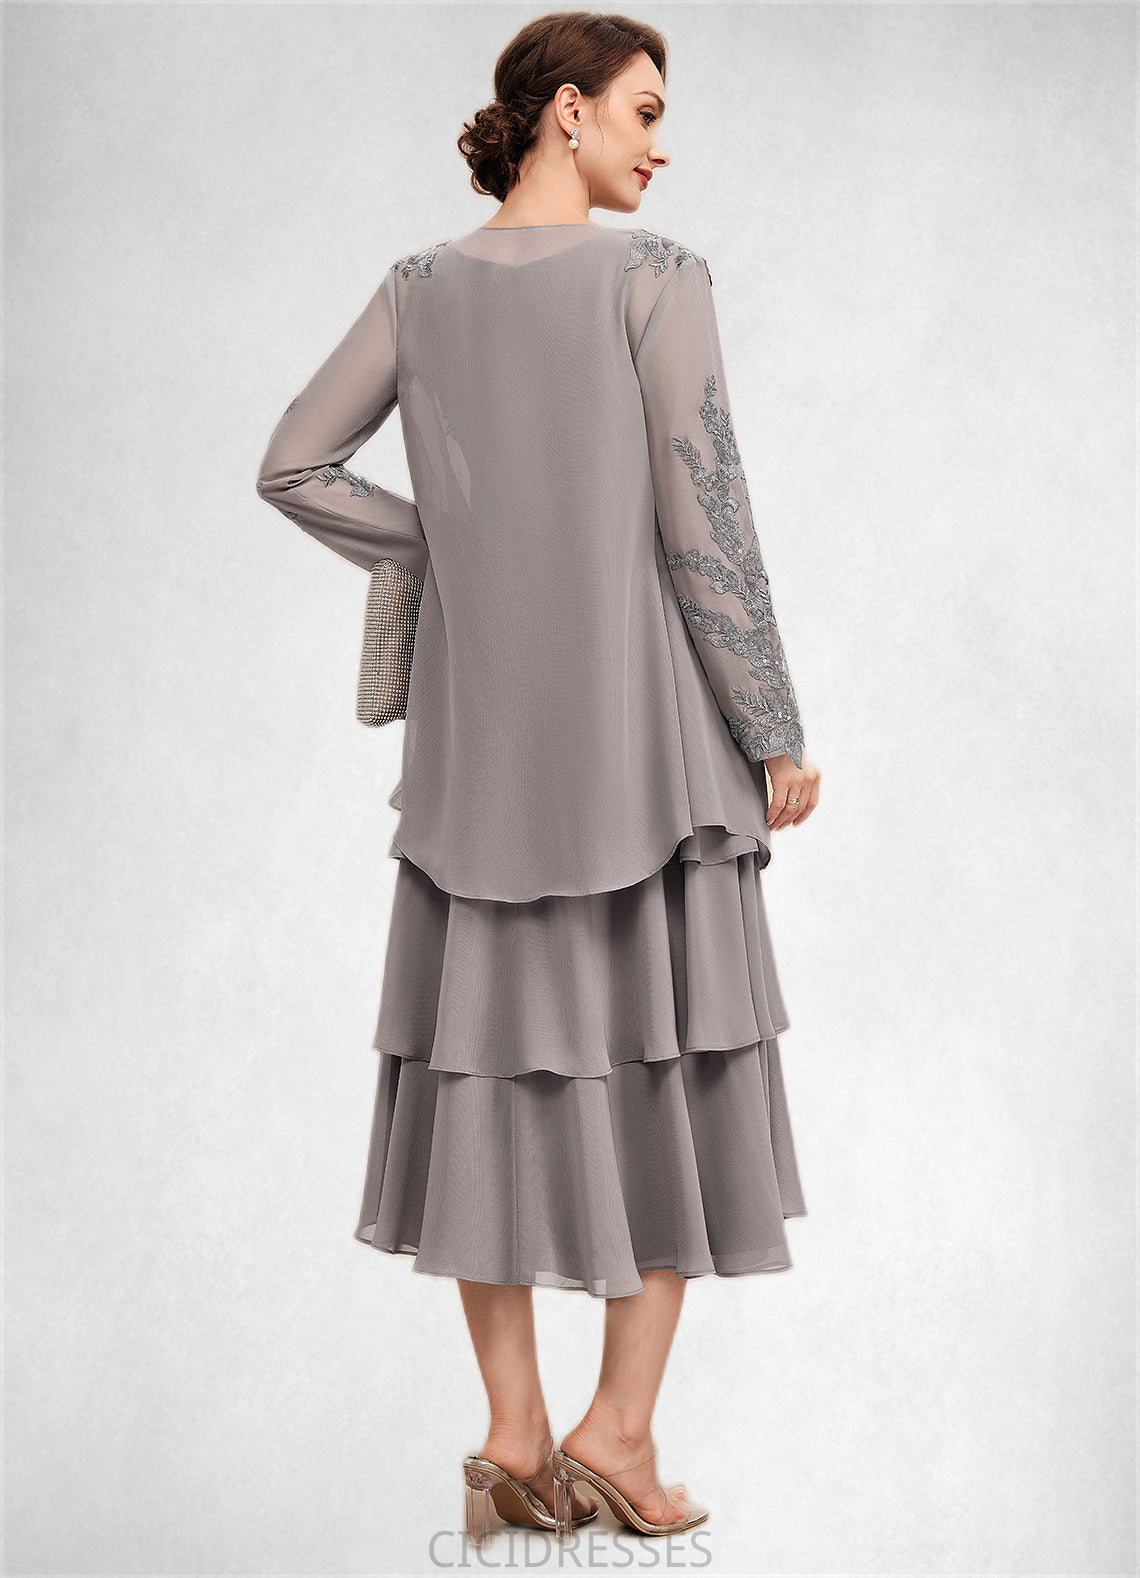 Susan A-Line Scoop Neck Tea-Length Chiffon Mother of the Bride Dress With Cascading Ruffles CIC8126P0014603